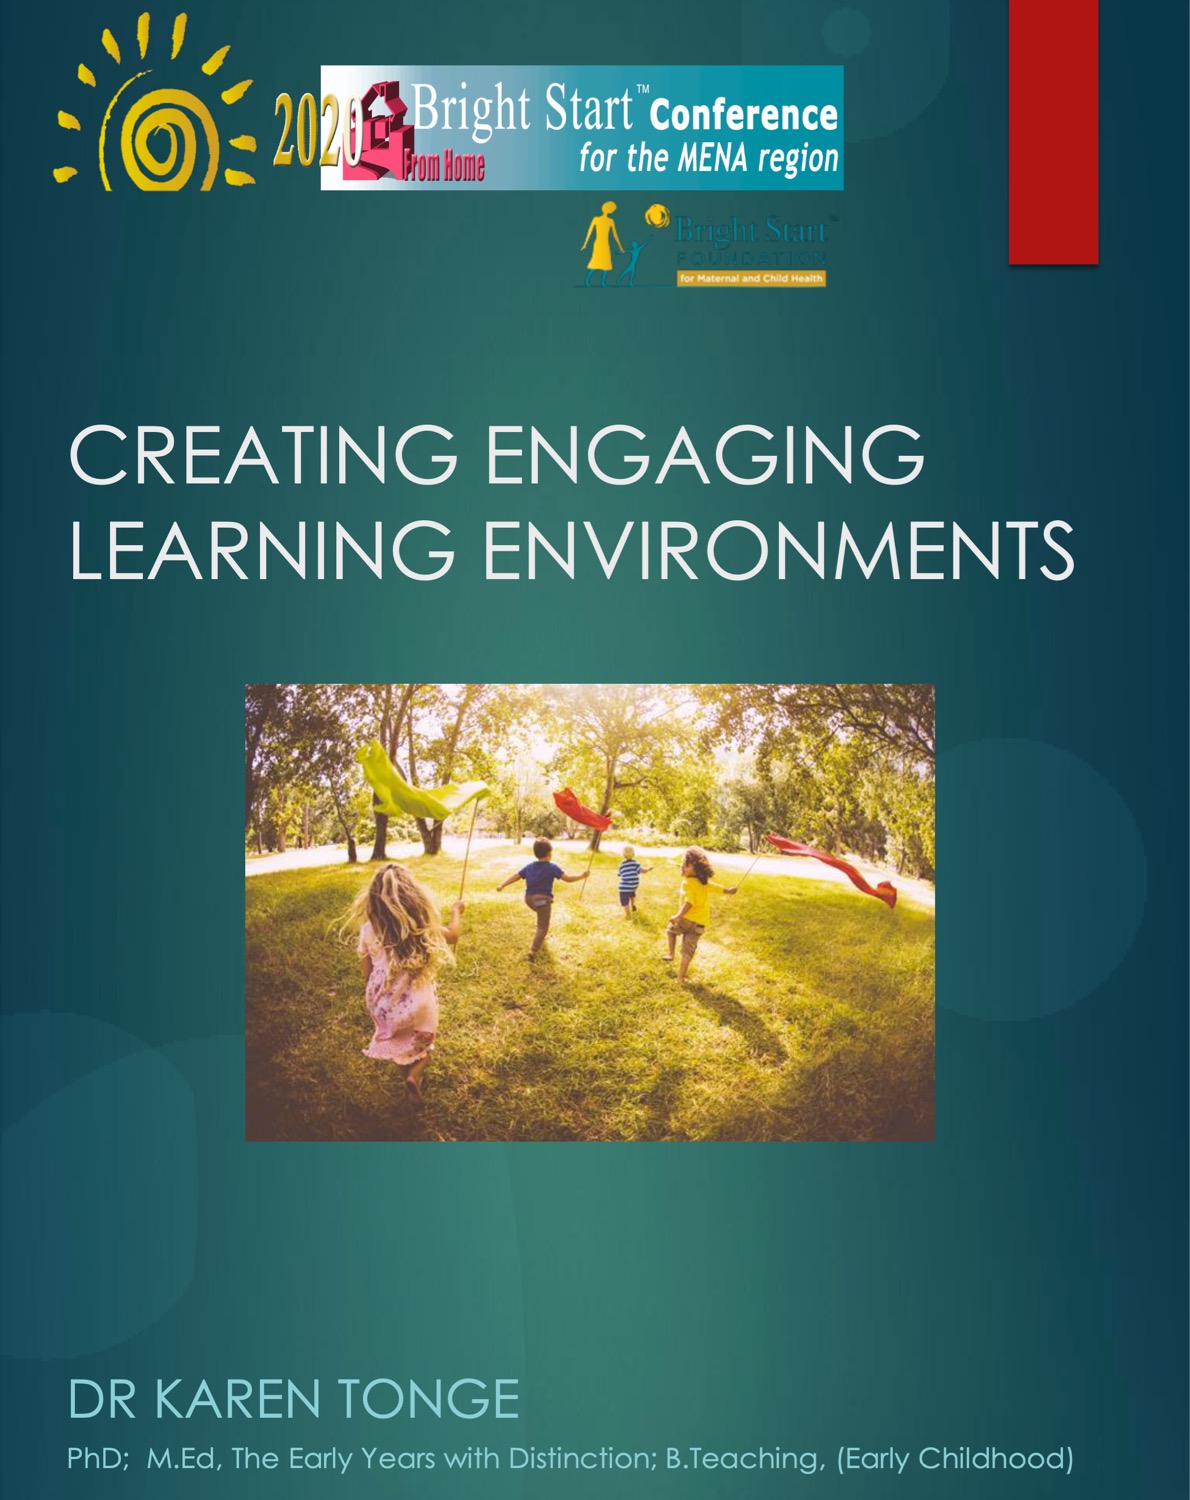 Handout for Creating Engaging Learning Environments